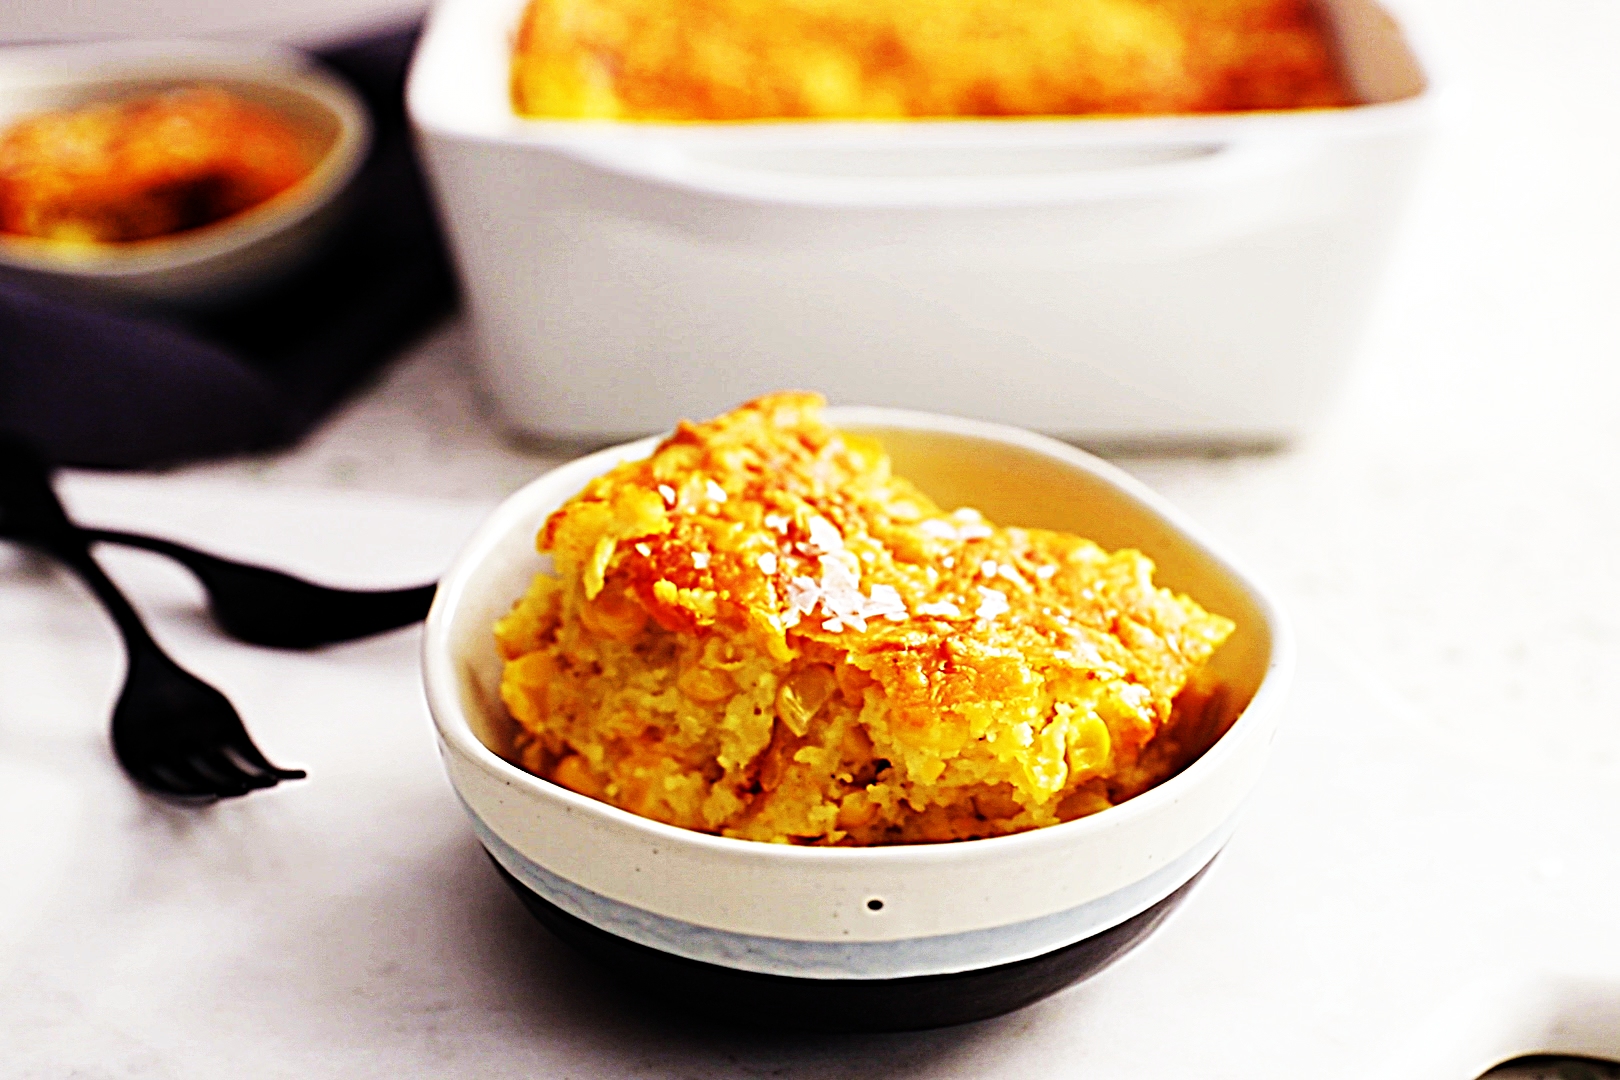 Stupid-Easy Recipe for Easy “Boxes and Cans” Corn Casserole (#1 Top-Rated)